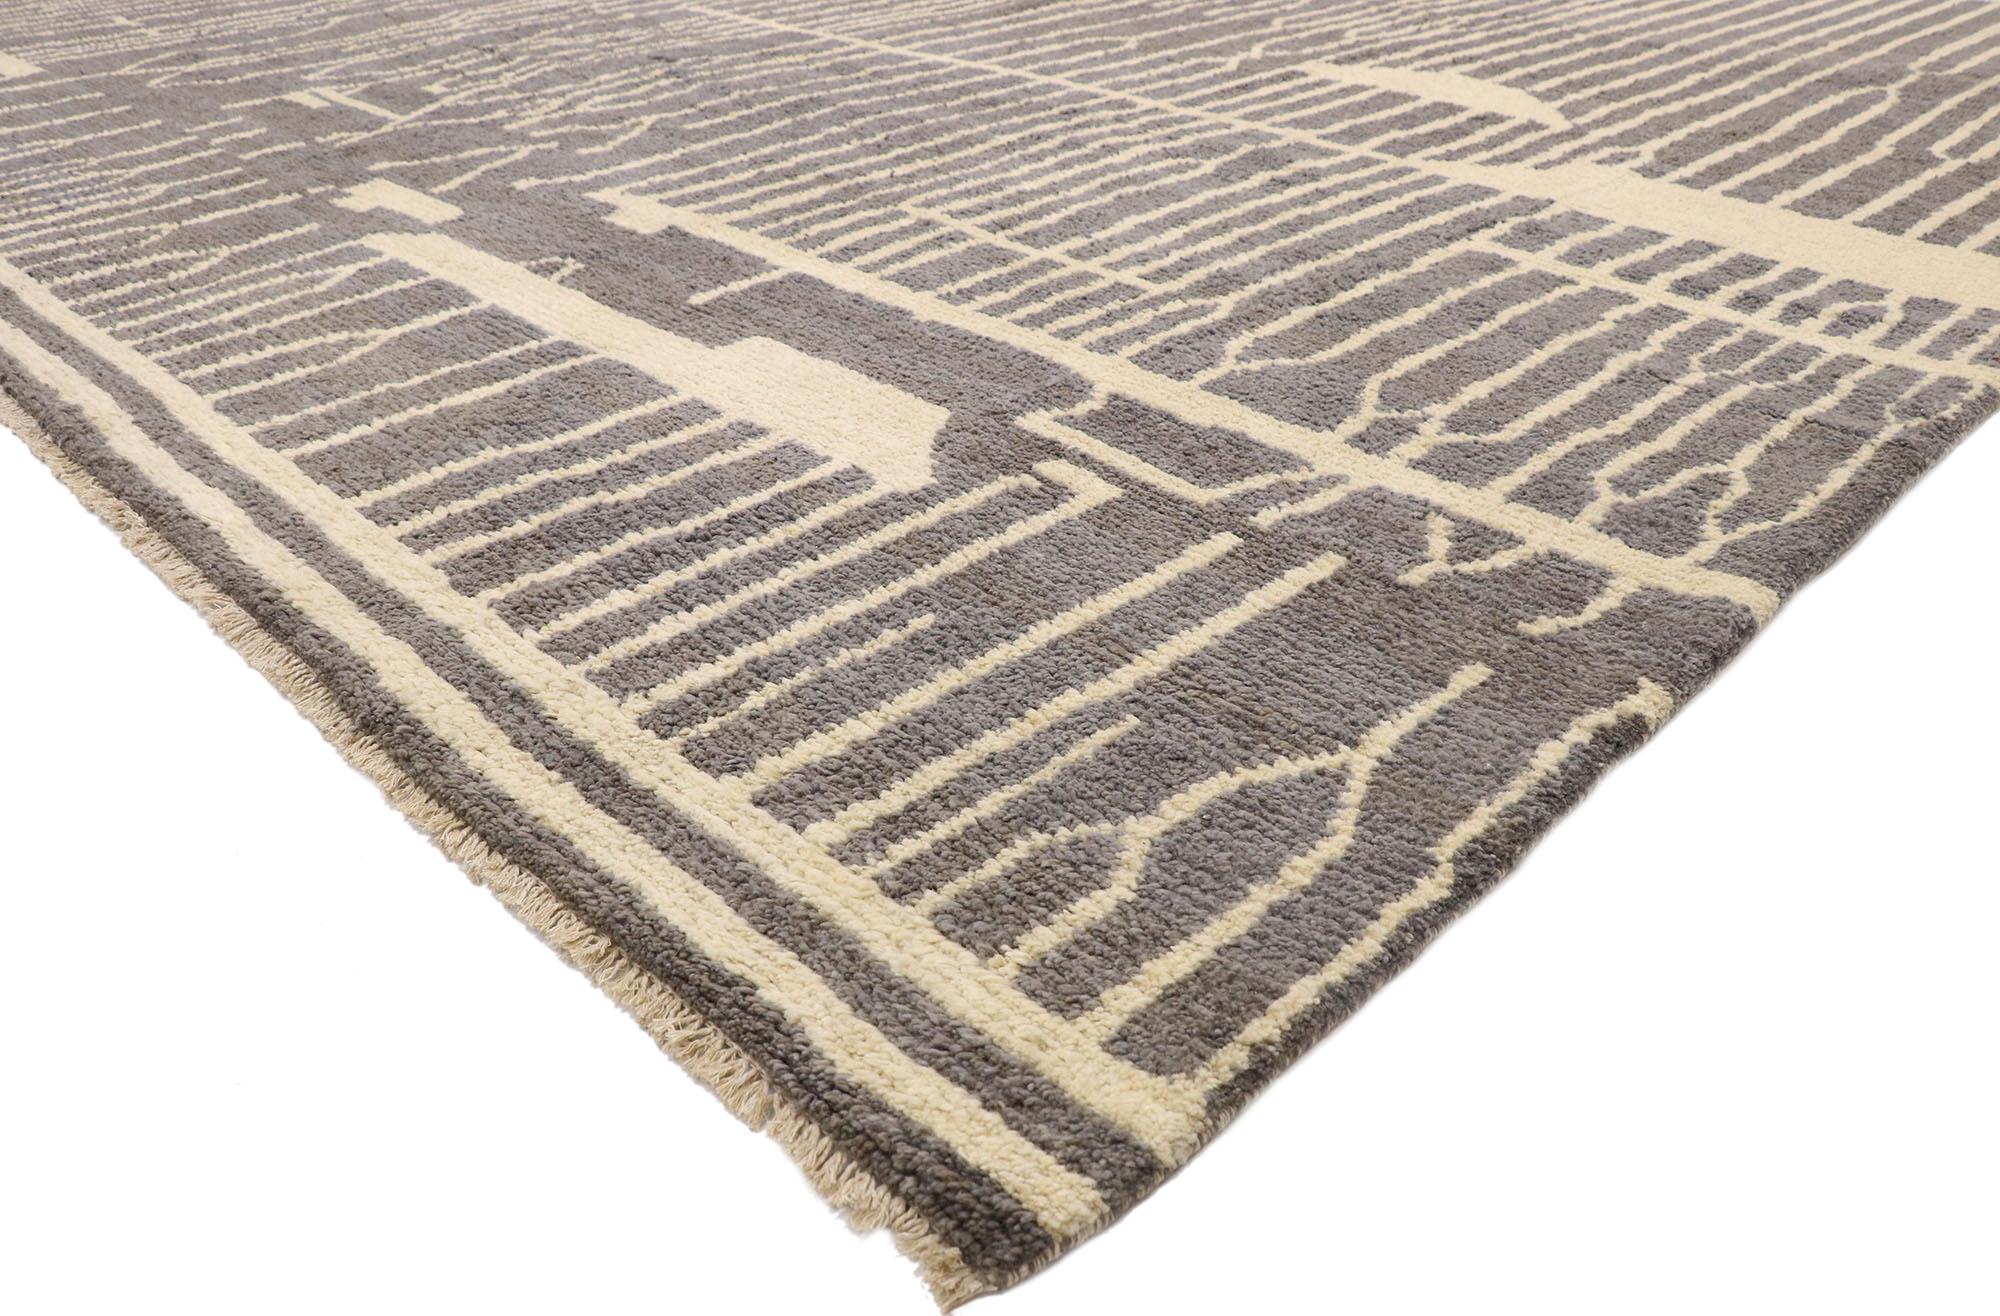 Pakistani New Contemporary Gray Moroccan Style Rug with Organic Modern Style Hygge Vibes